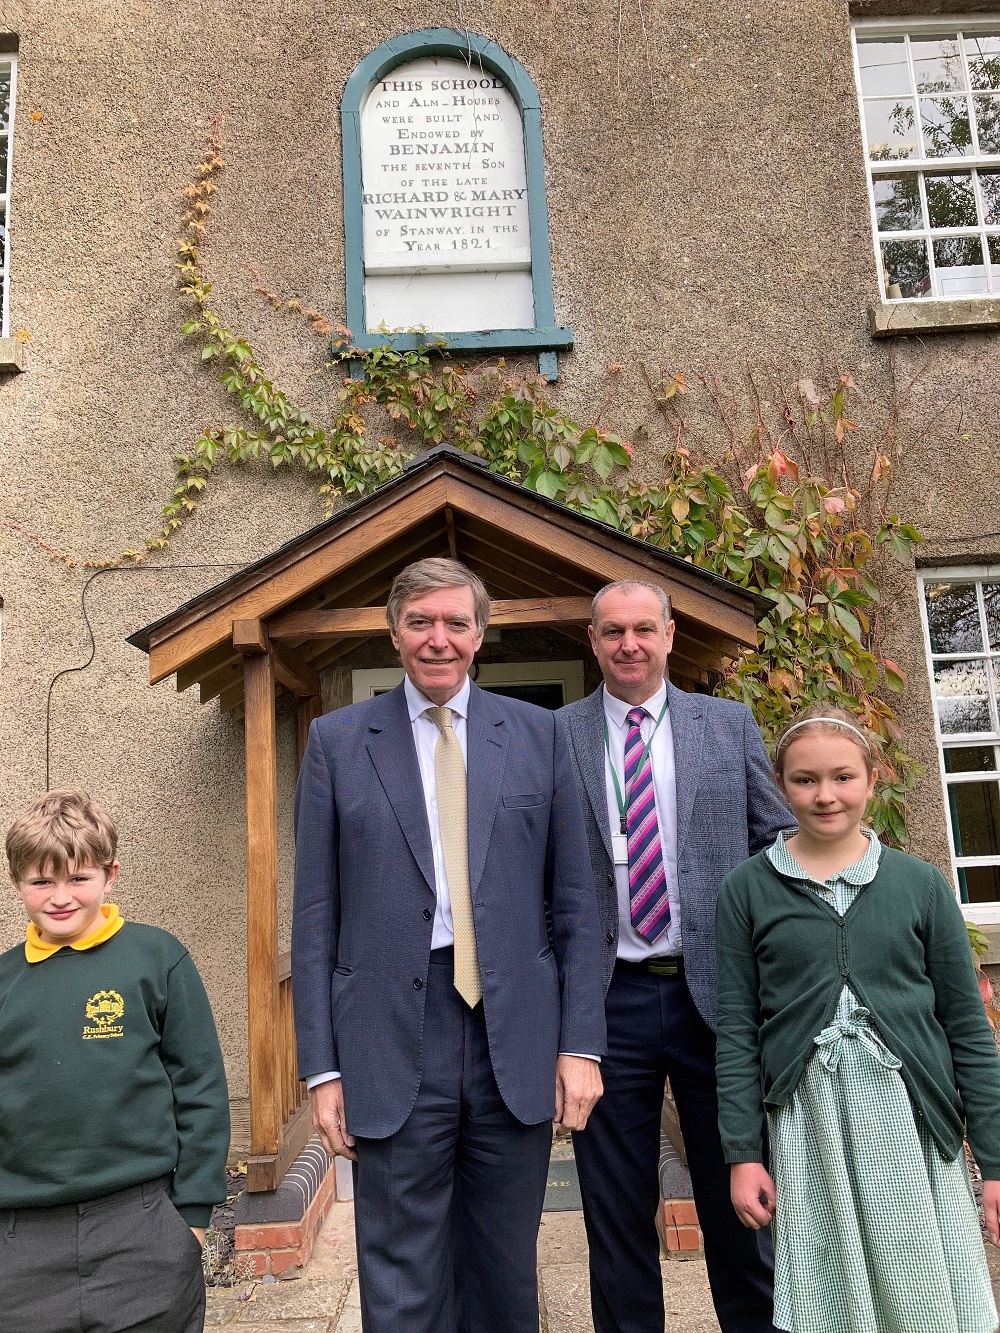 Philip Dunne MP with Rushbury School Headteacher, Steve Morris, and Year 5 pupils Isaac Stokes and Rosie Cashmore